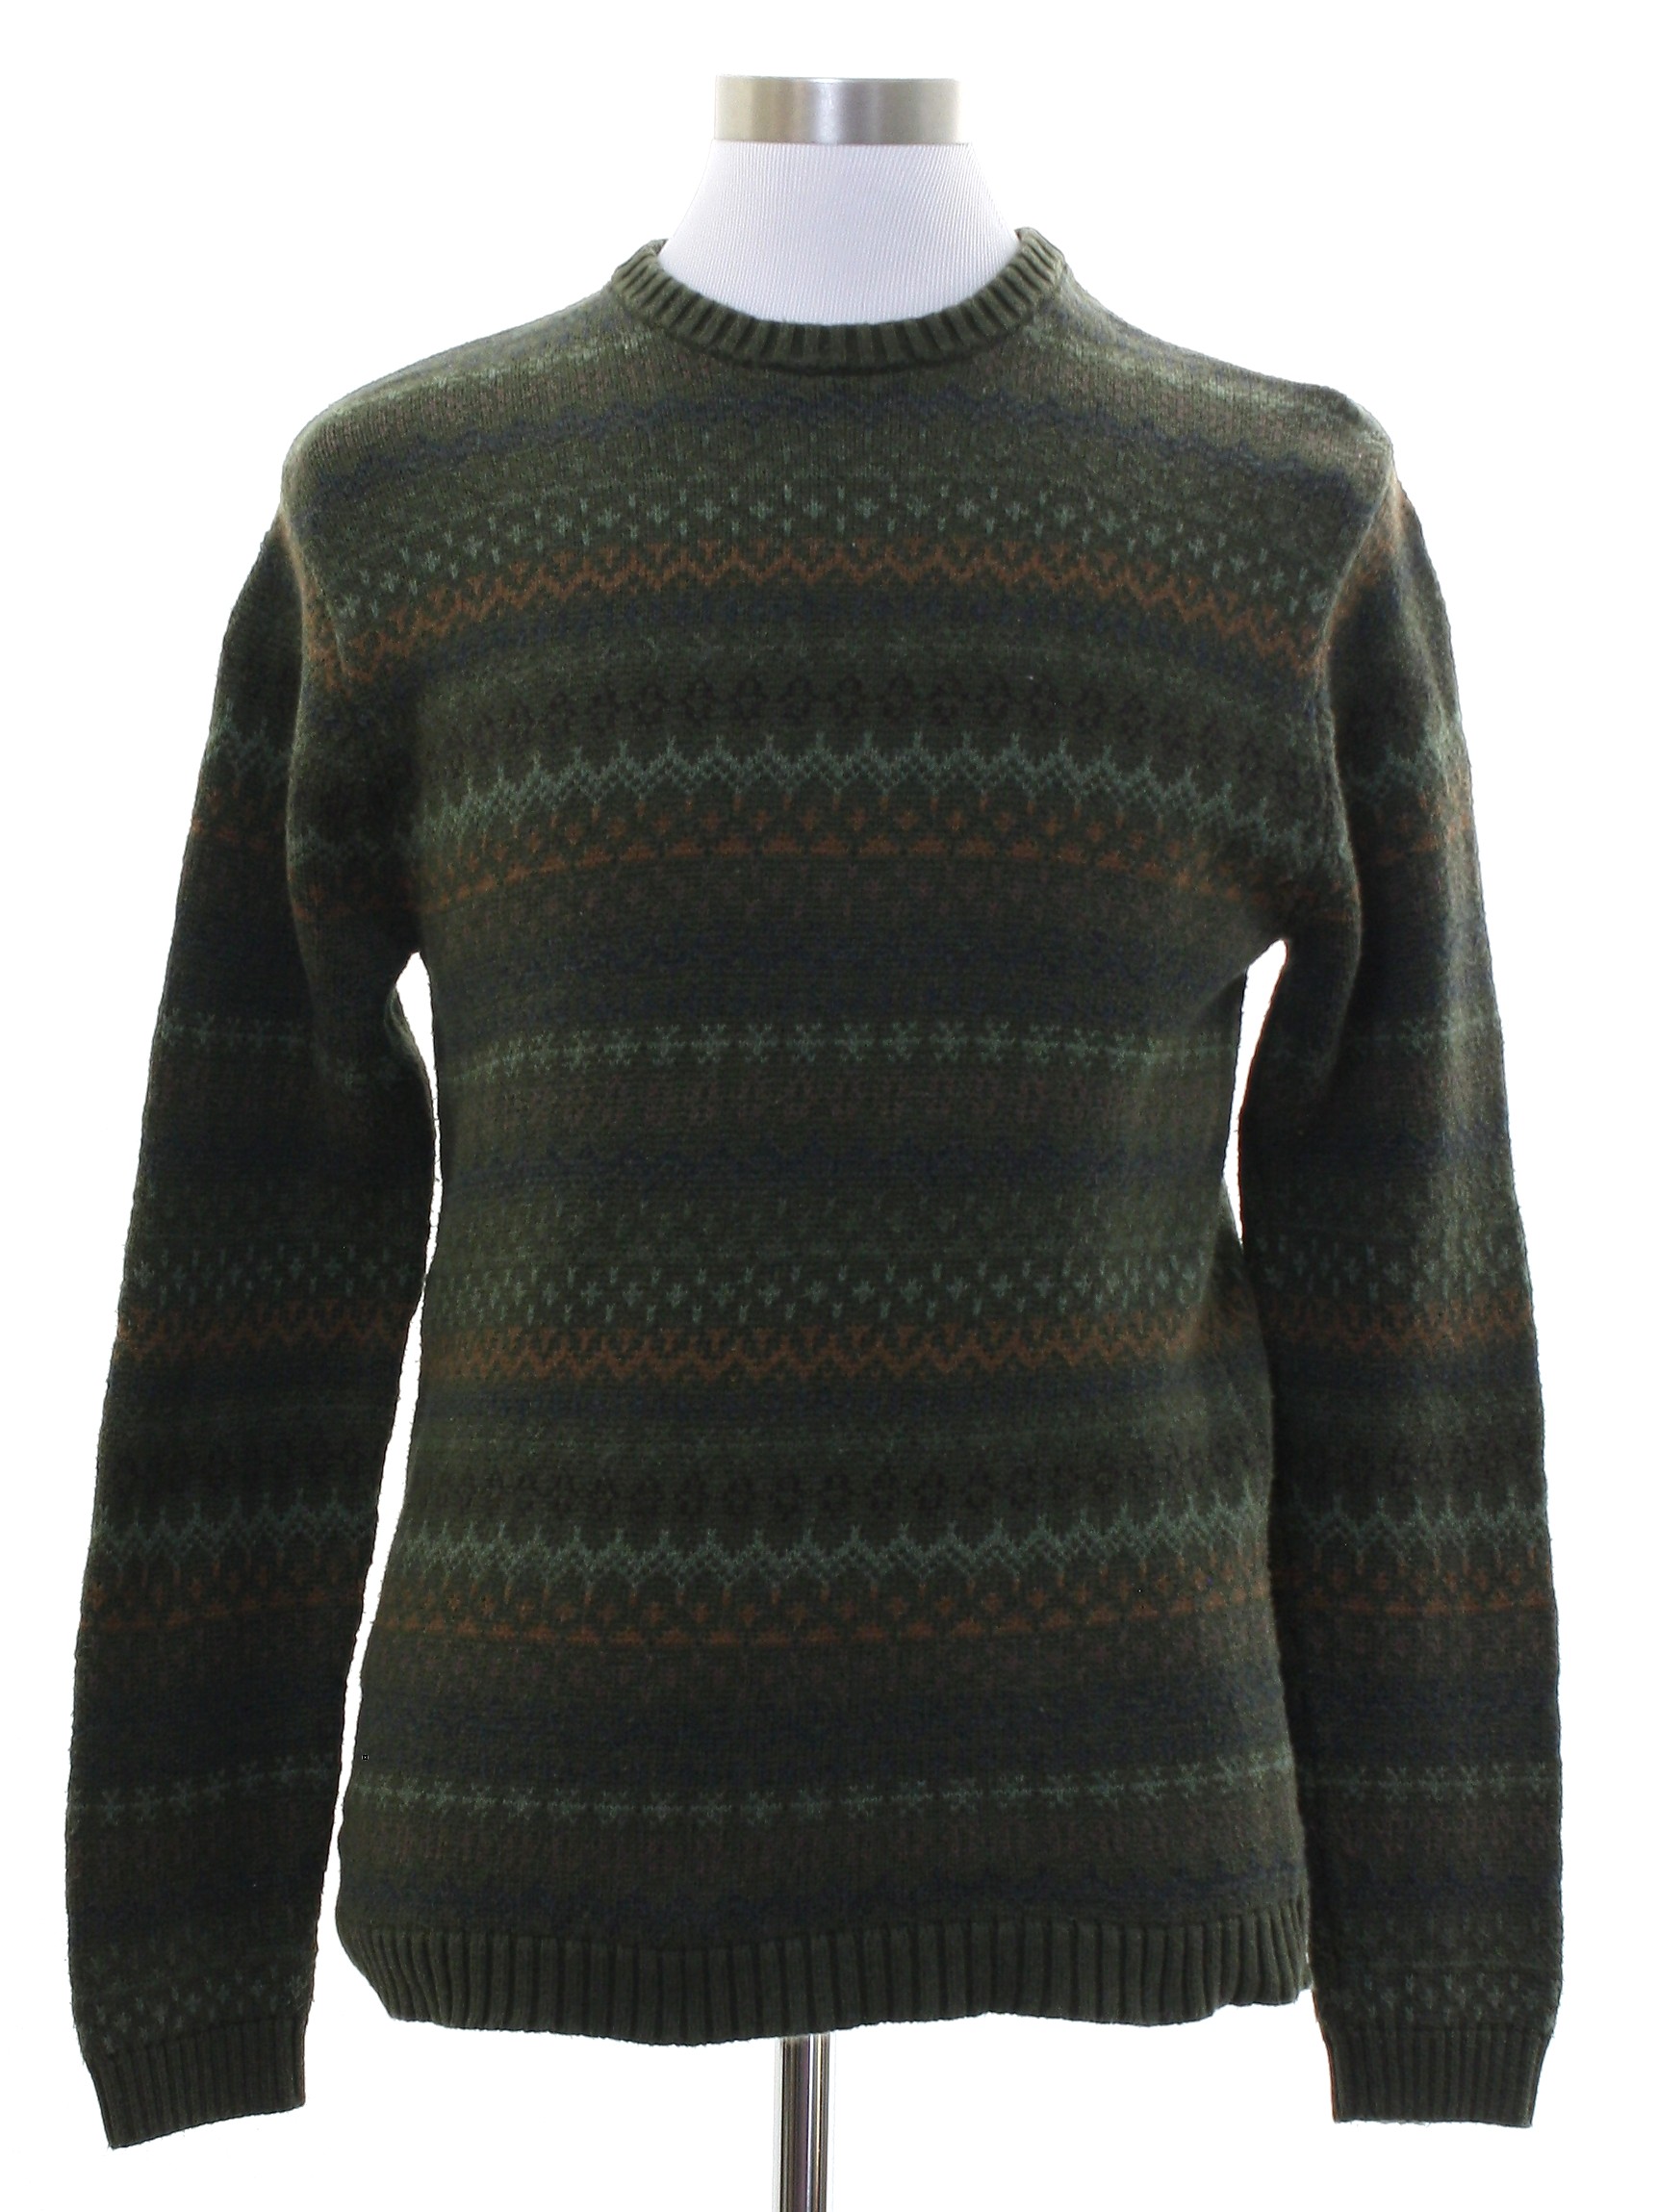 Vintage 1990's Sweater: Late 90s -Cherokee- Mens Olive green background ...